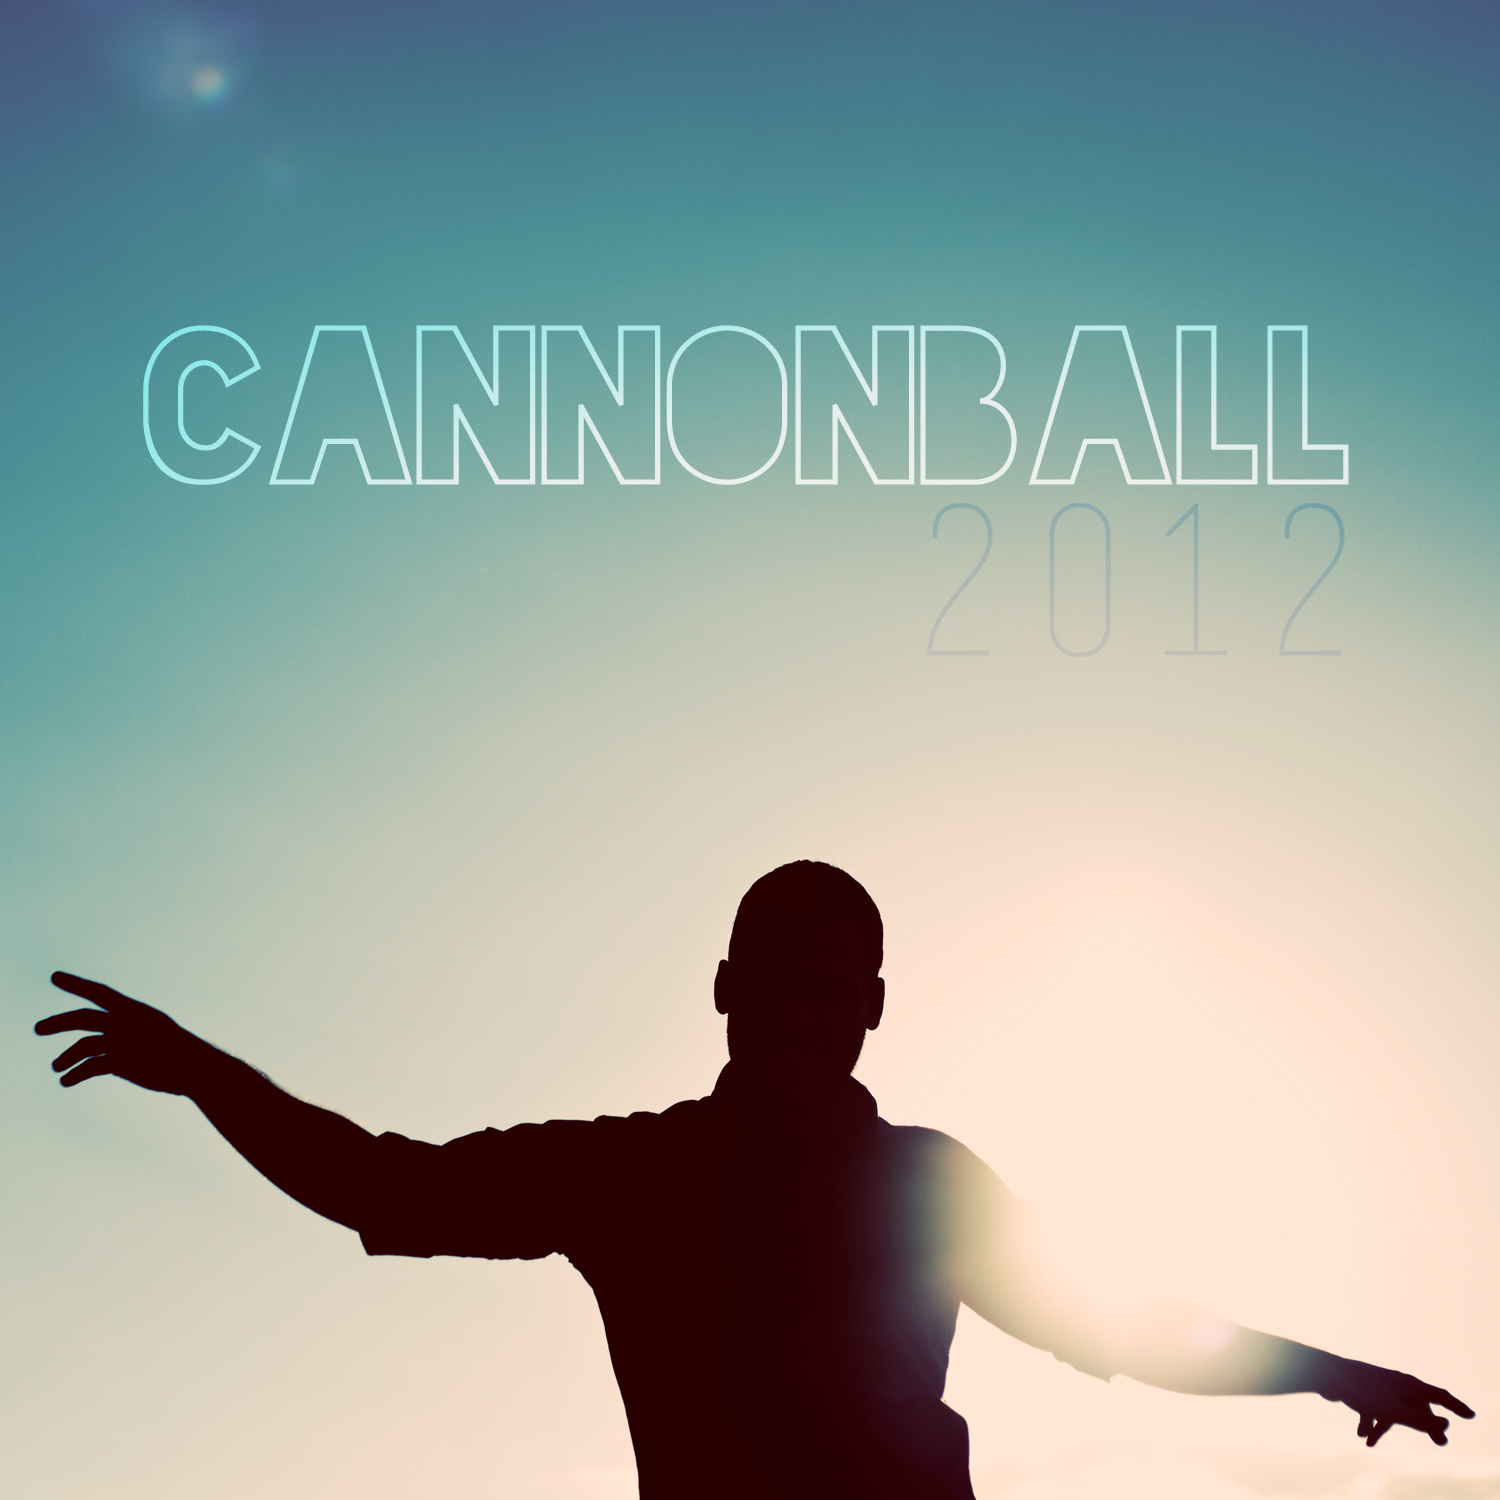 Cannonball 2012 by Tyler Stenson